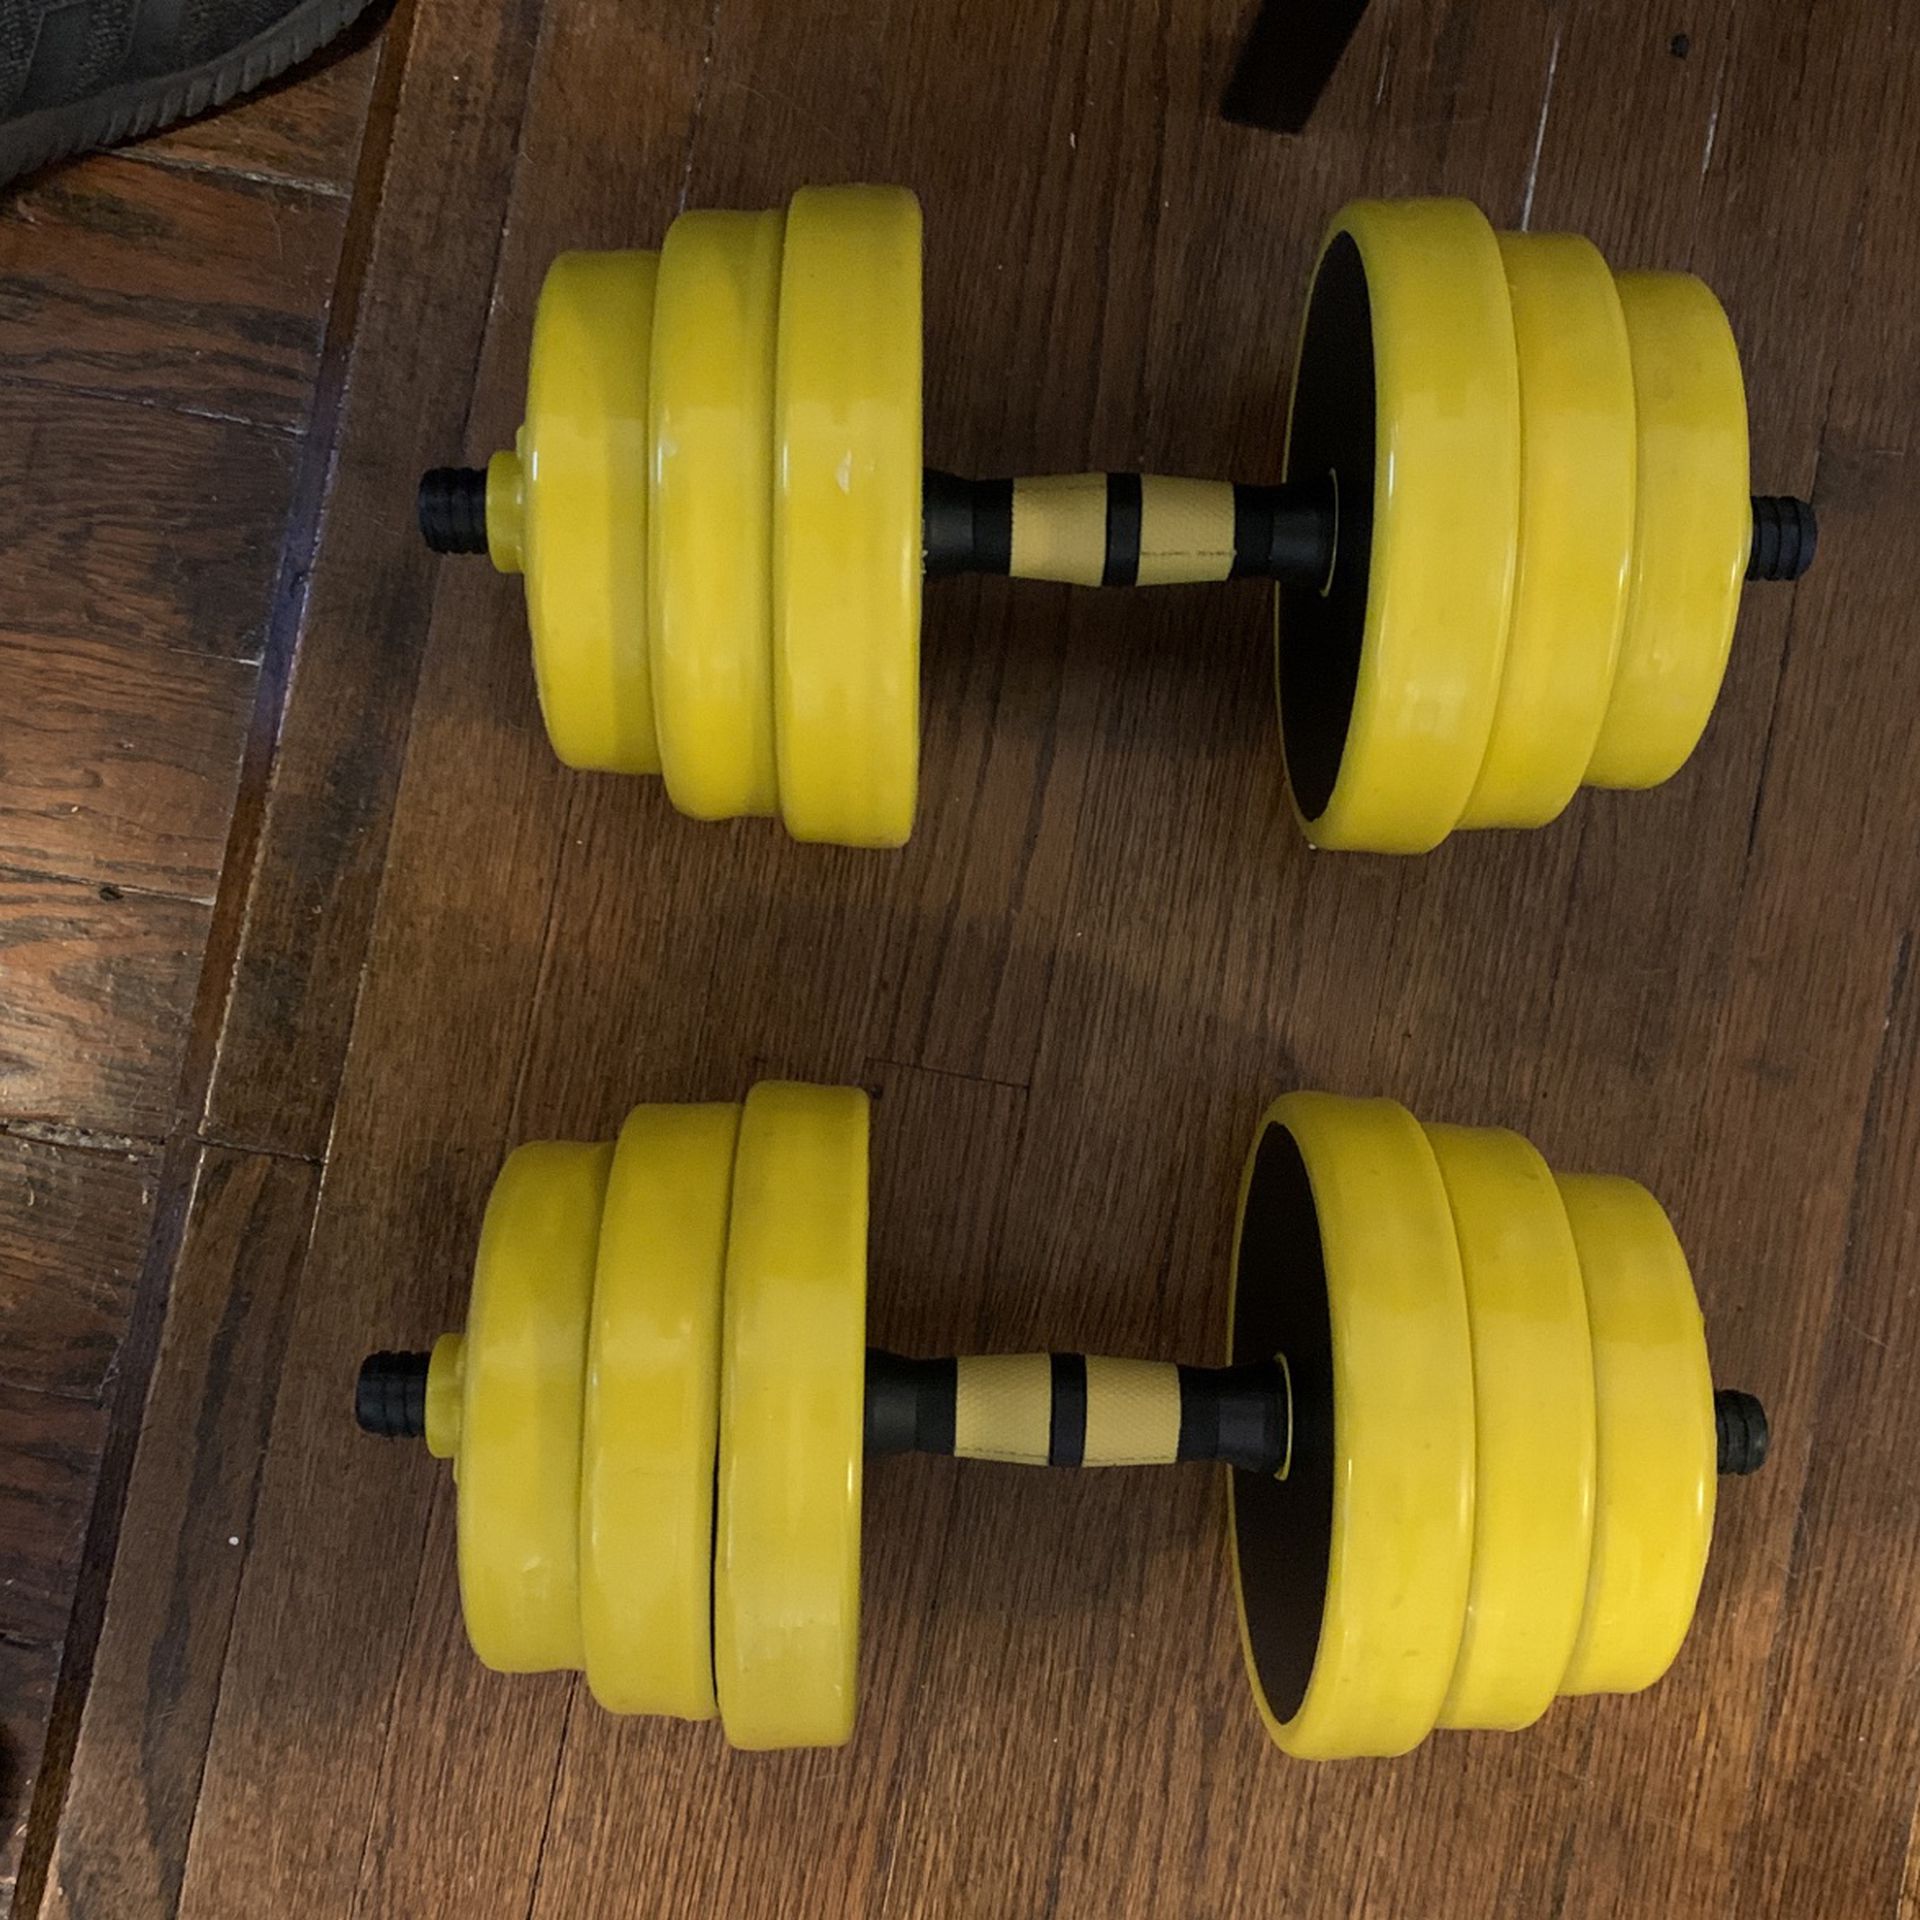 Adjustable Weights - Great For Home Gym!